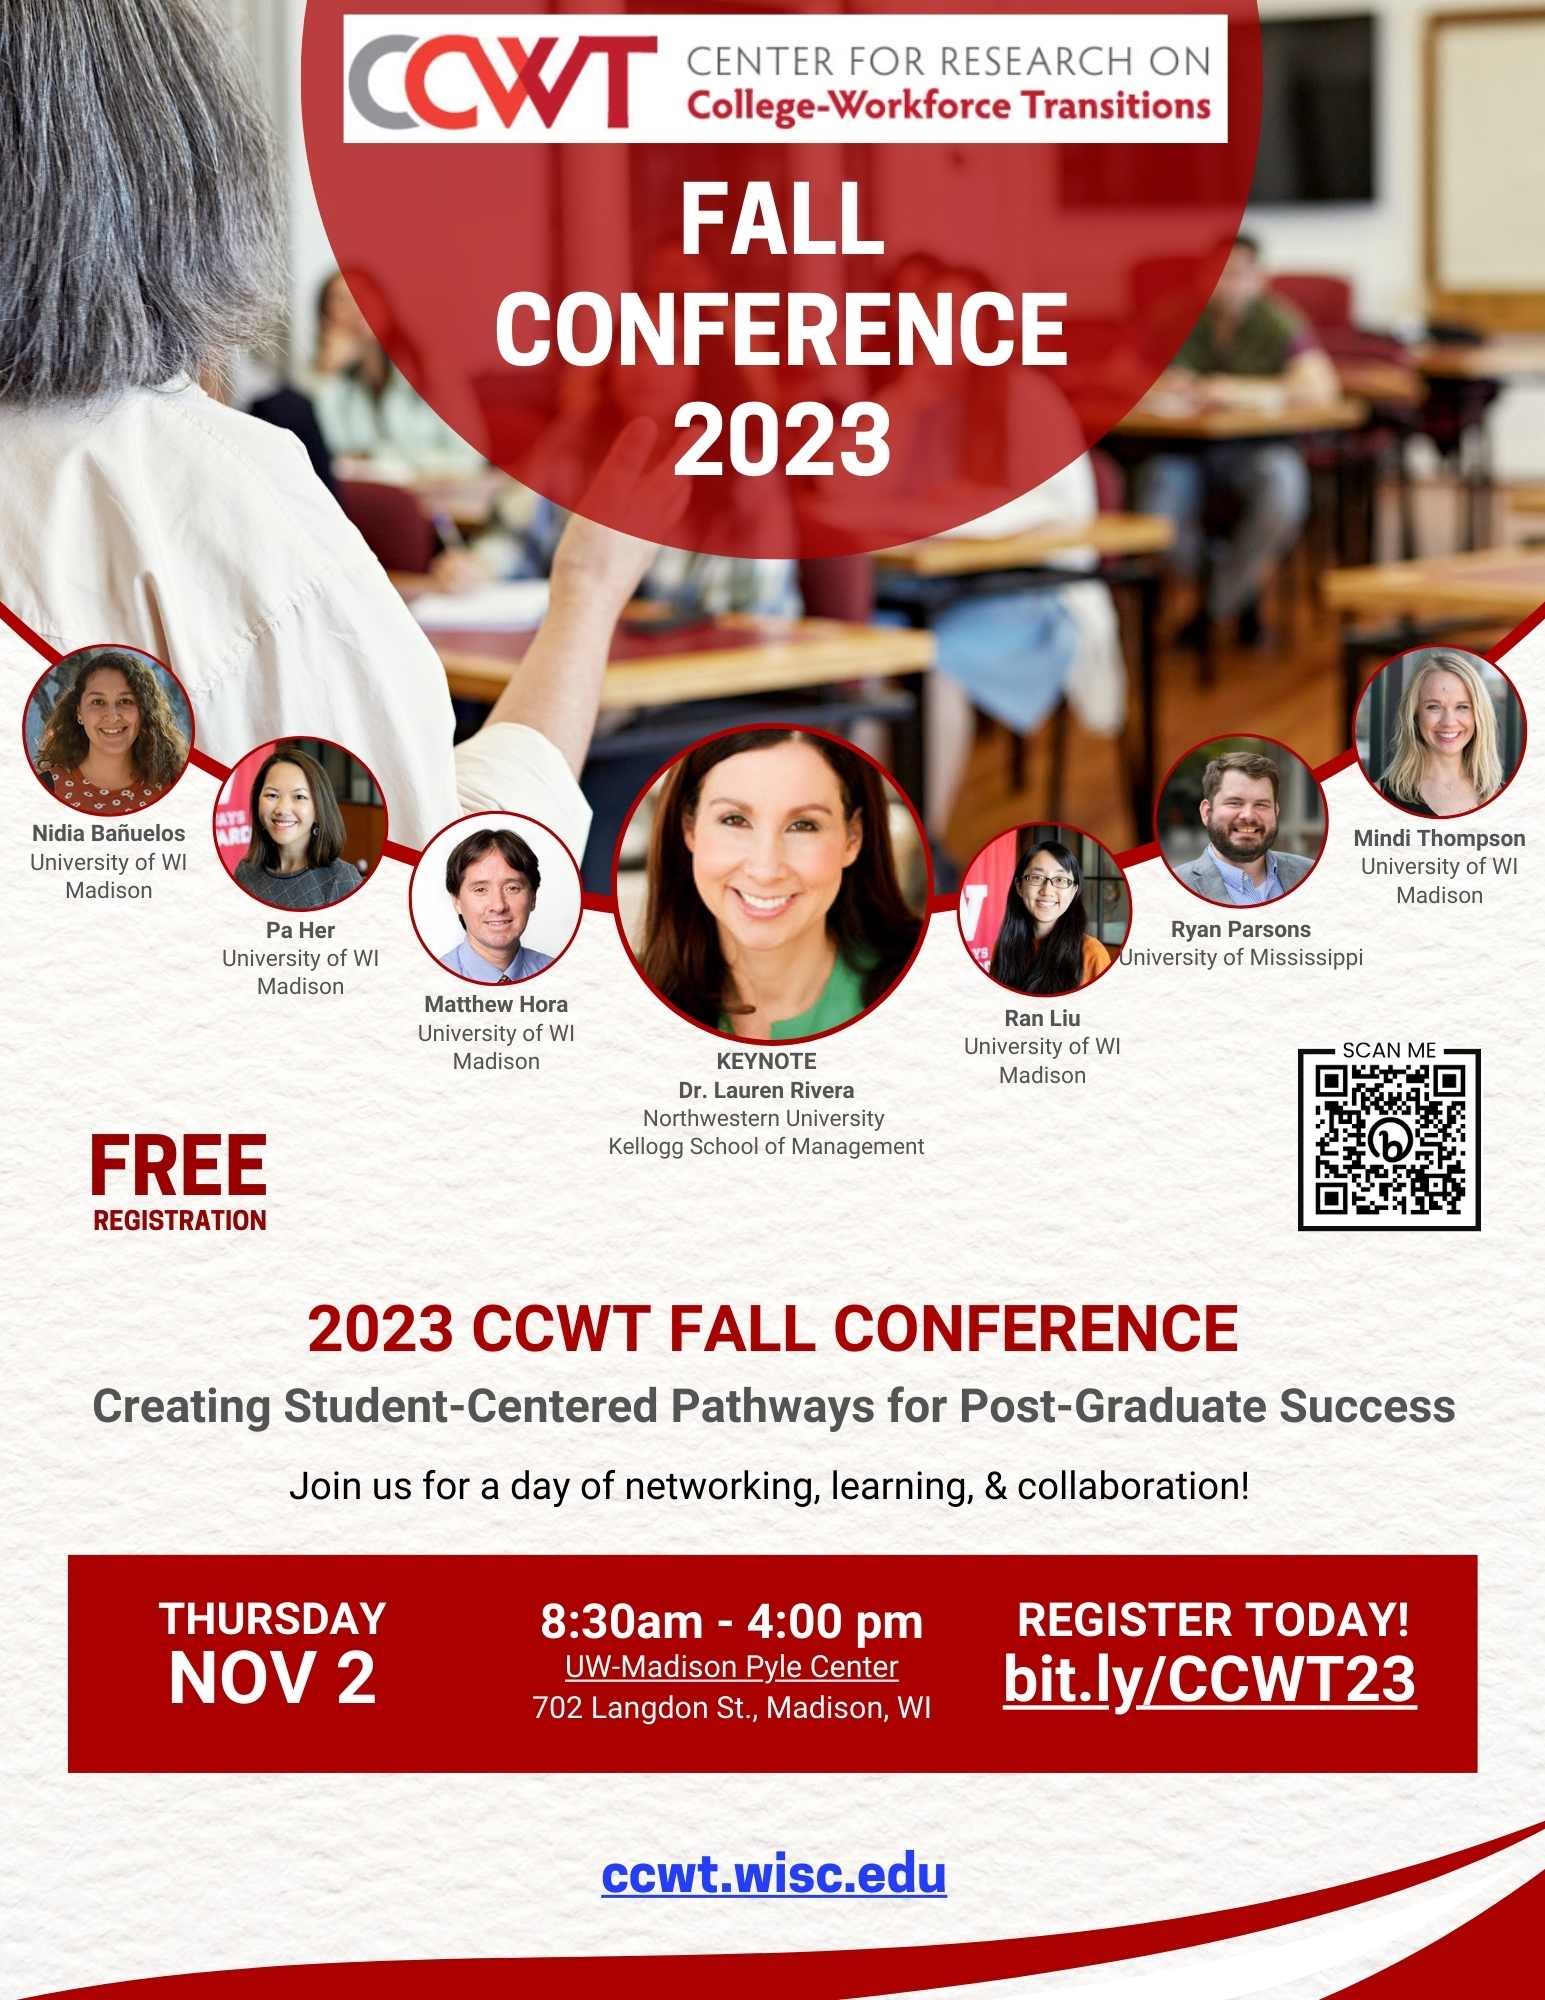 Center for Research on College-Workforce Transition (CCCWT) Fall Conference Flyer https://ccwt.wisc.edu/wp-content/uploads/2023/08/2023-Fall-Conference-Flyer-11-1.pdf